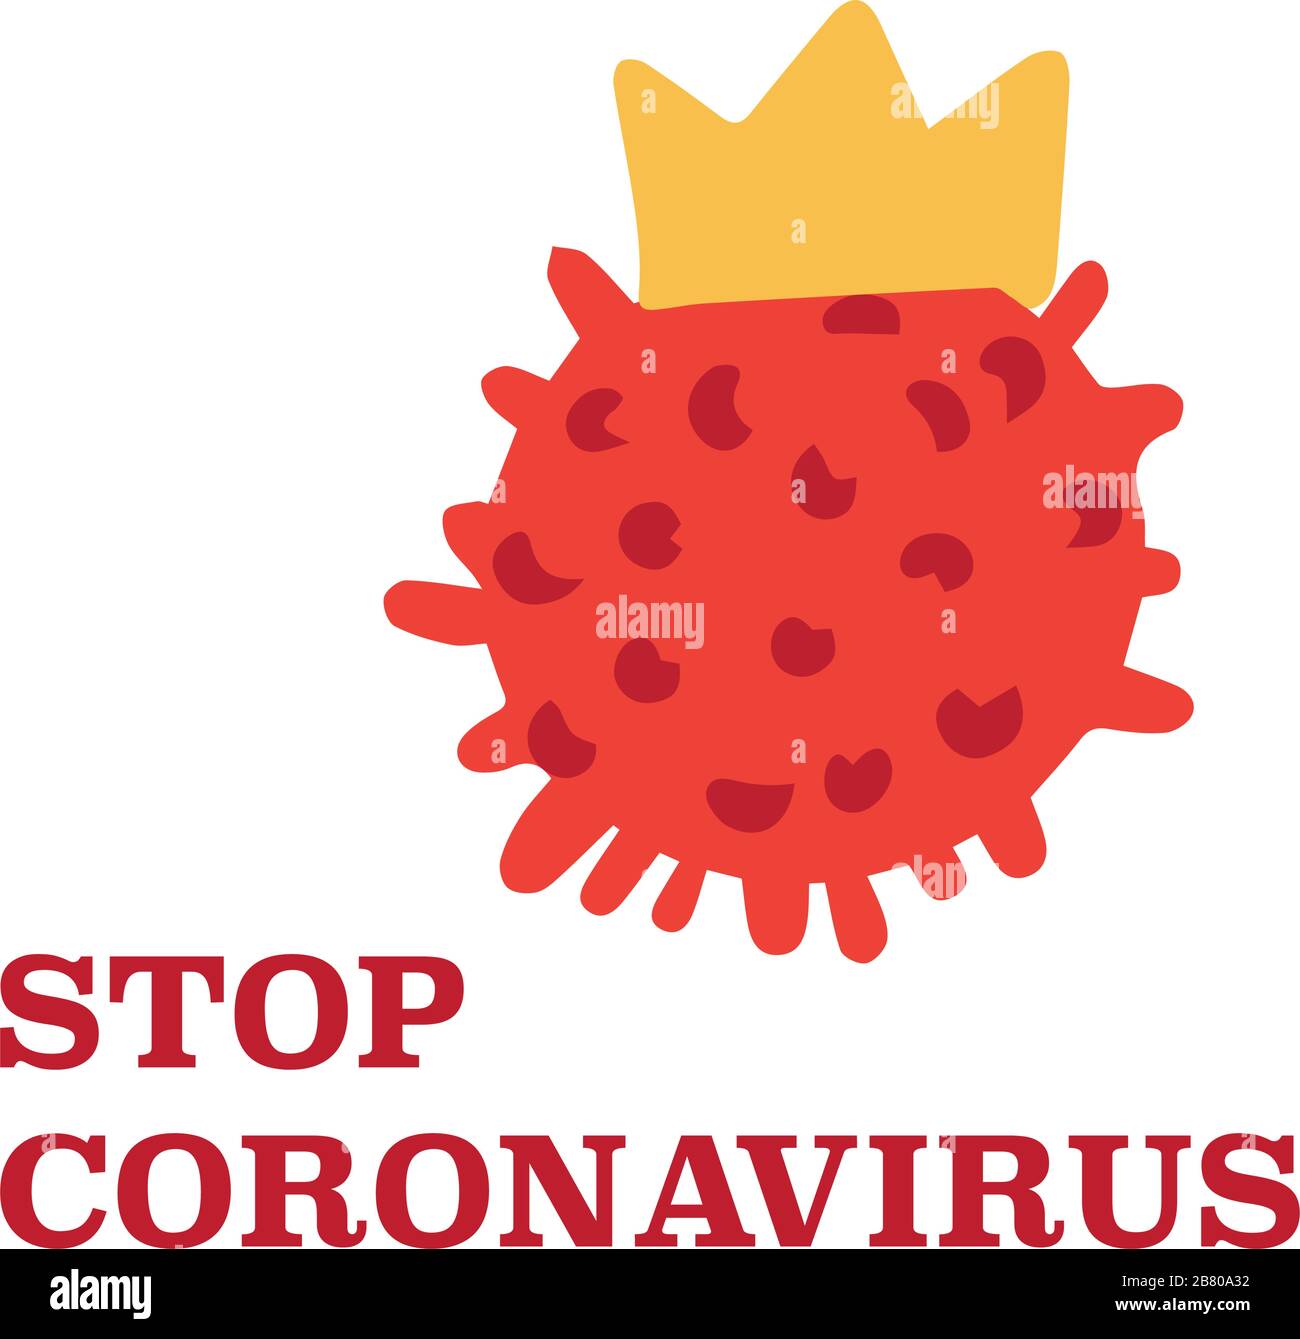 Stop coronavirus 2019-nC0V outbreak. Stop pandemic COVID-19 microbe. The virus attacks the respiratory tract, infections medical health risk. Travel Alert concept. Flat simple cartoon style Stock Vector